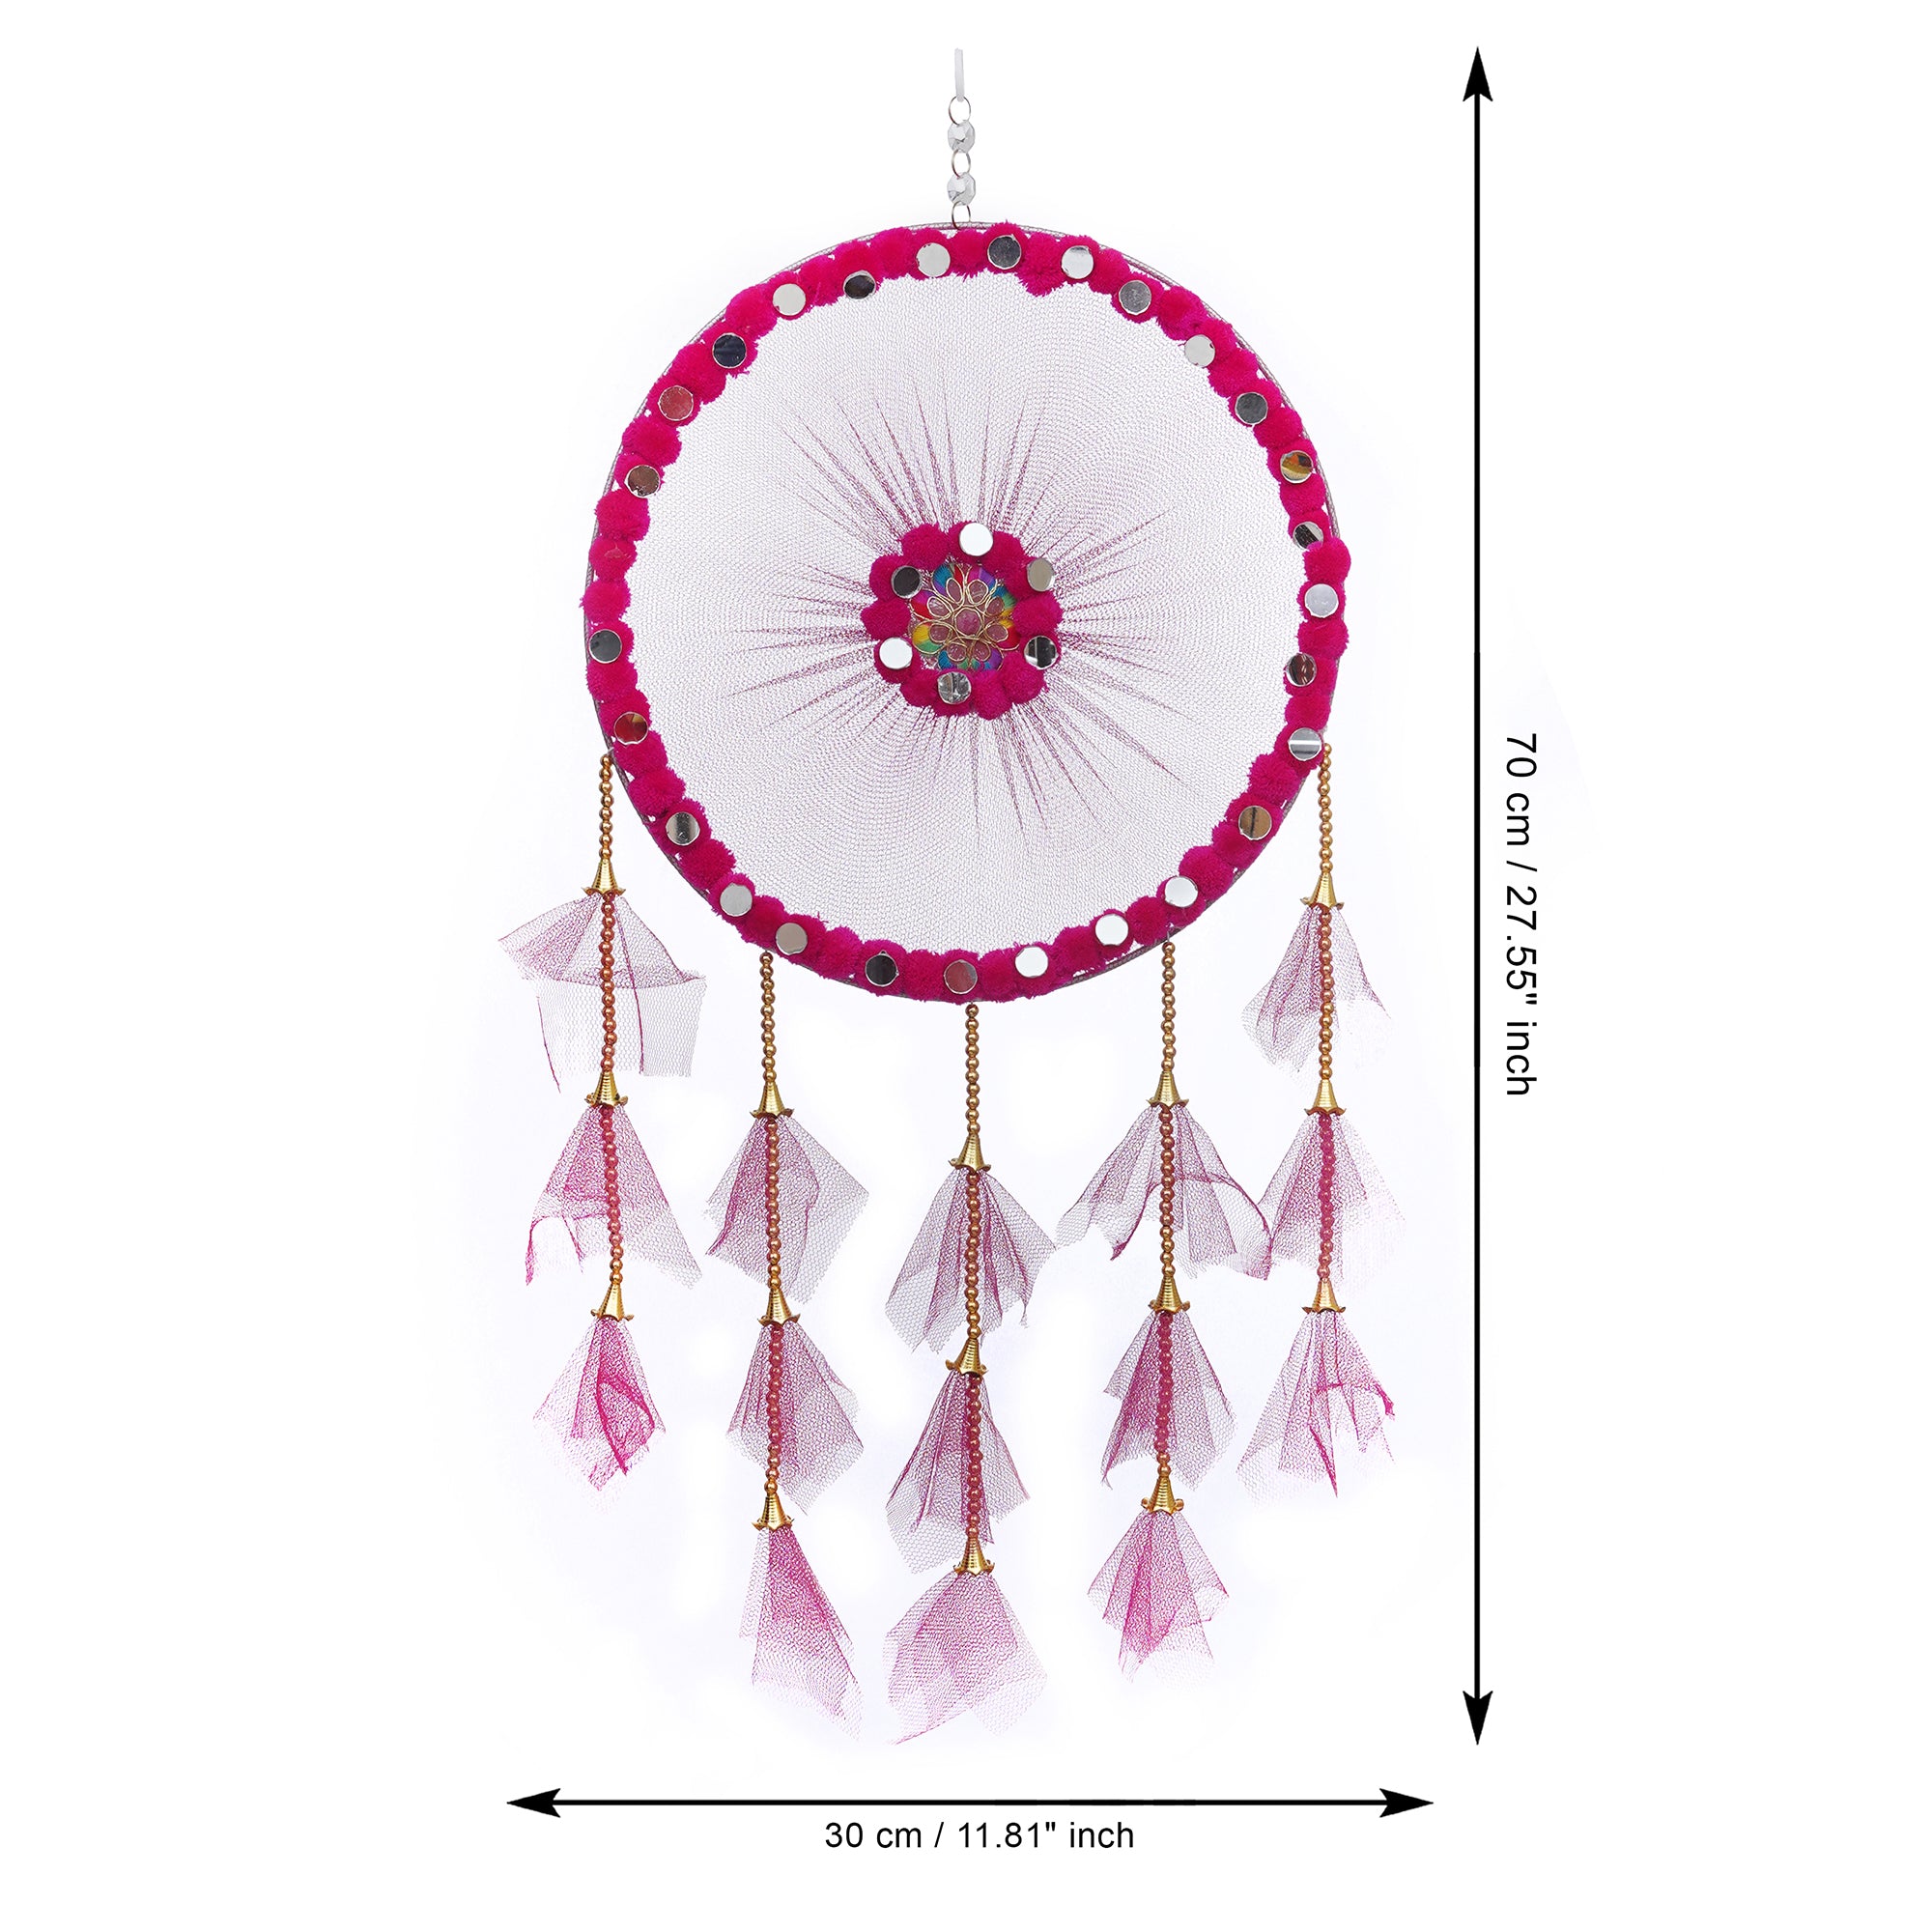 eCraftIndia Pink Wall Hanging Dream Catcher For Home Decor - Perfect Window, Bedroom, Living Room, Wall Decoration Item 3